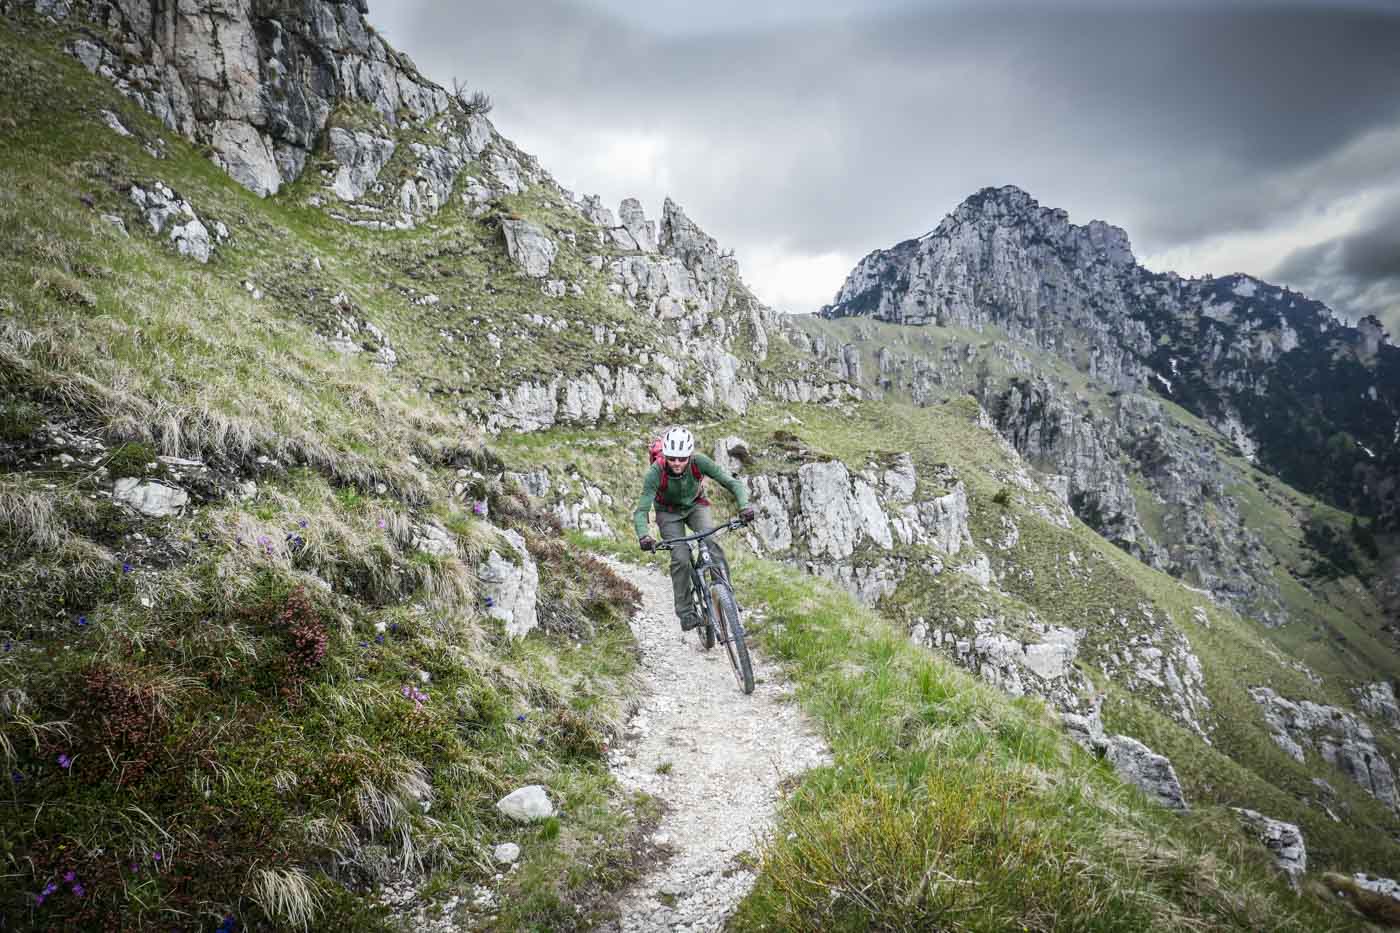 Mountain bikers in action in the mountains at Lake Idro